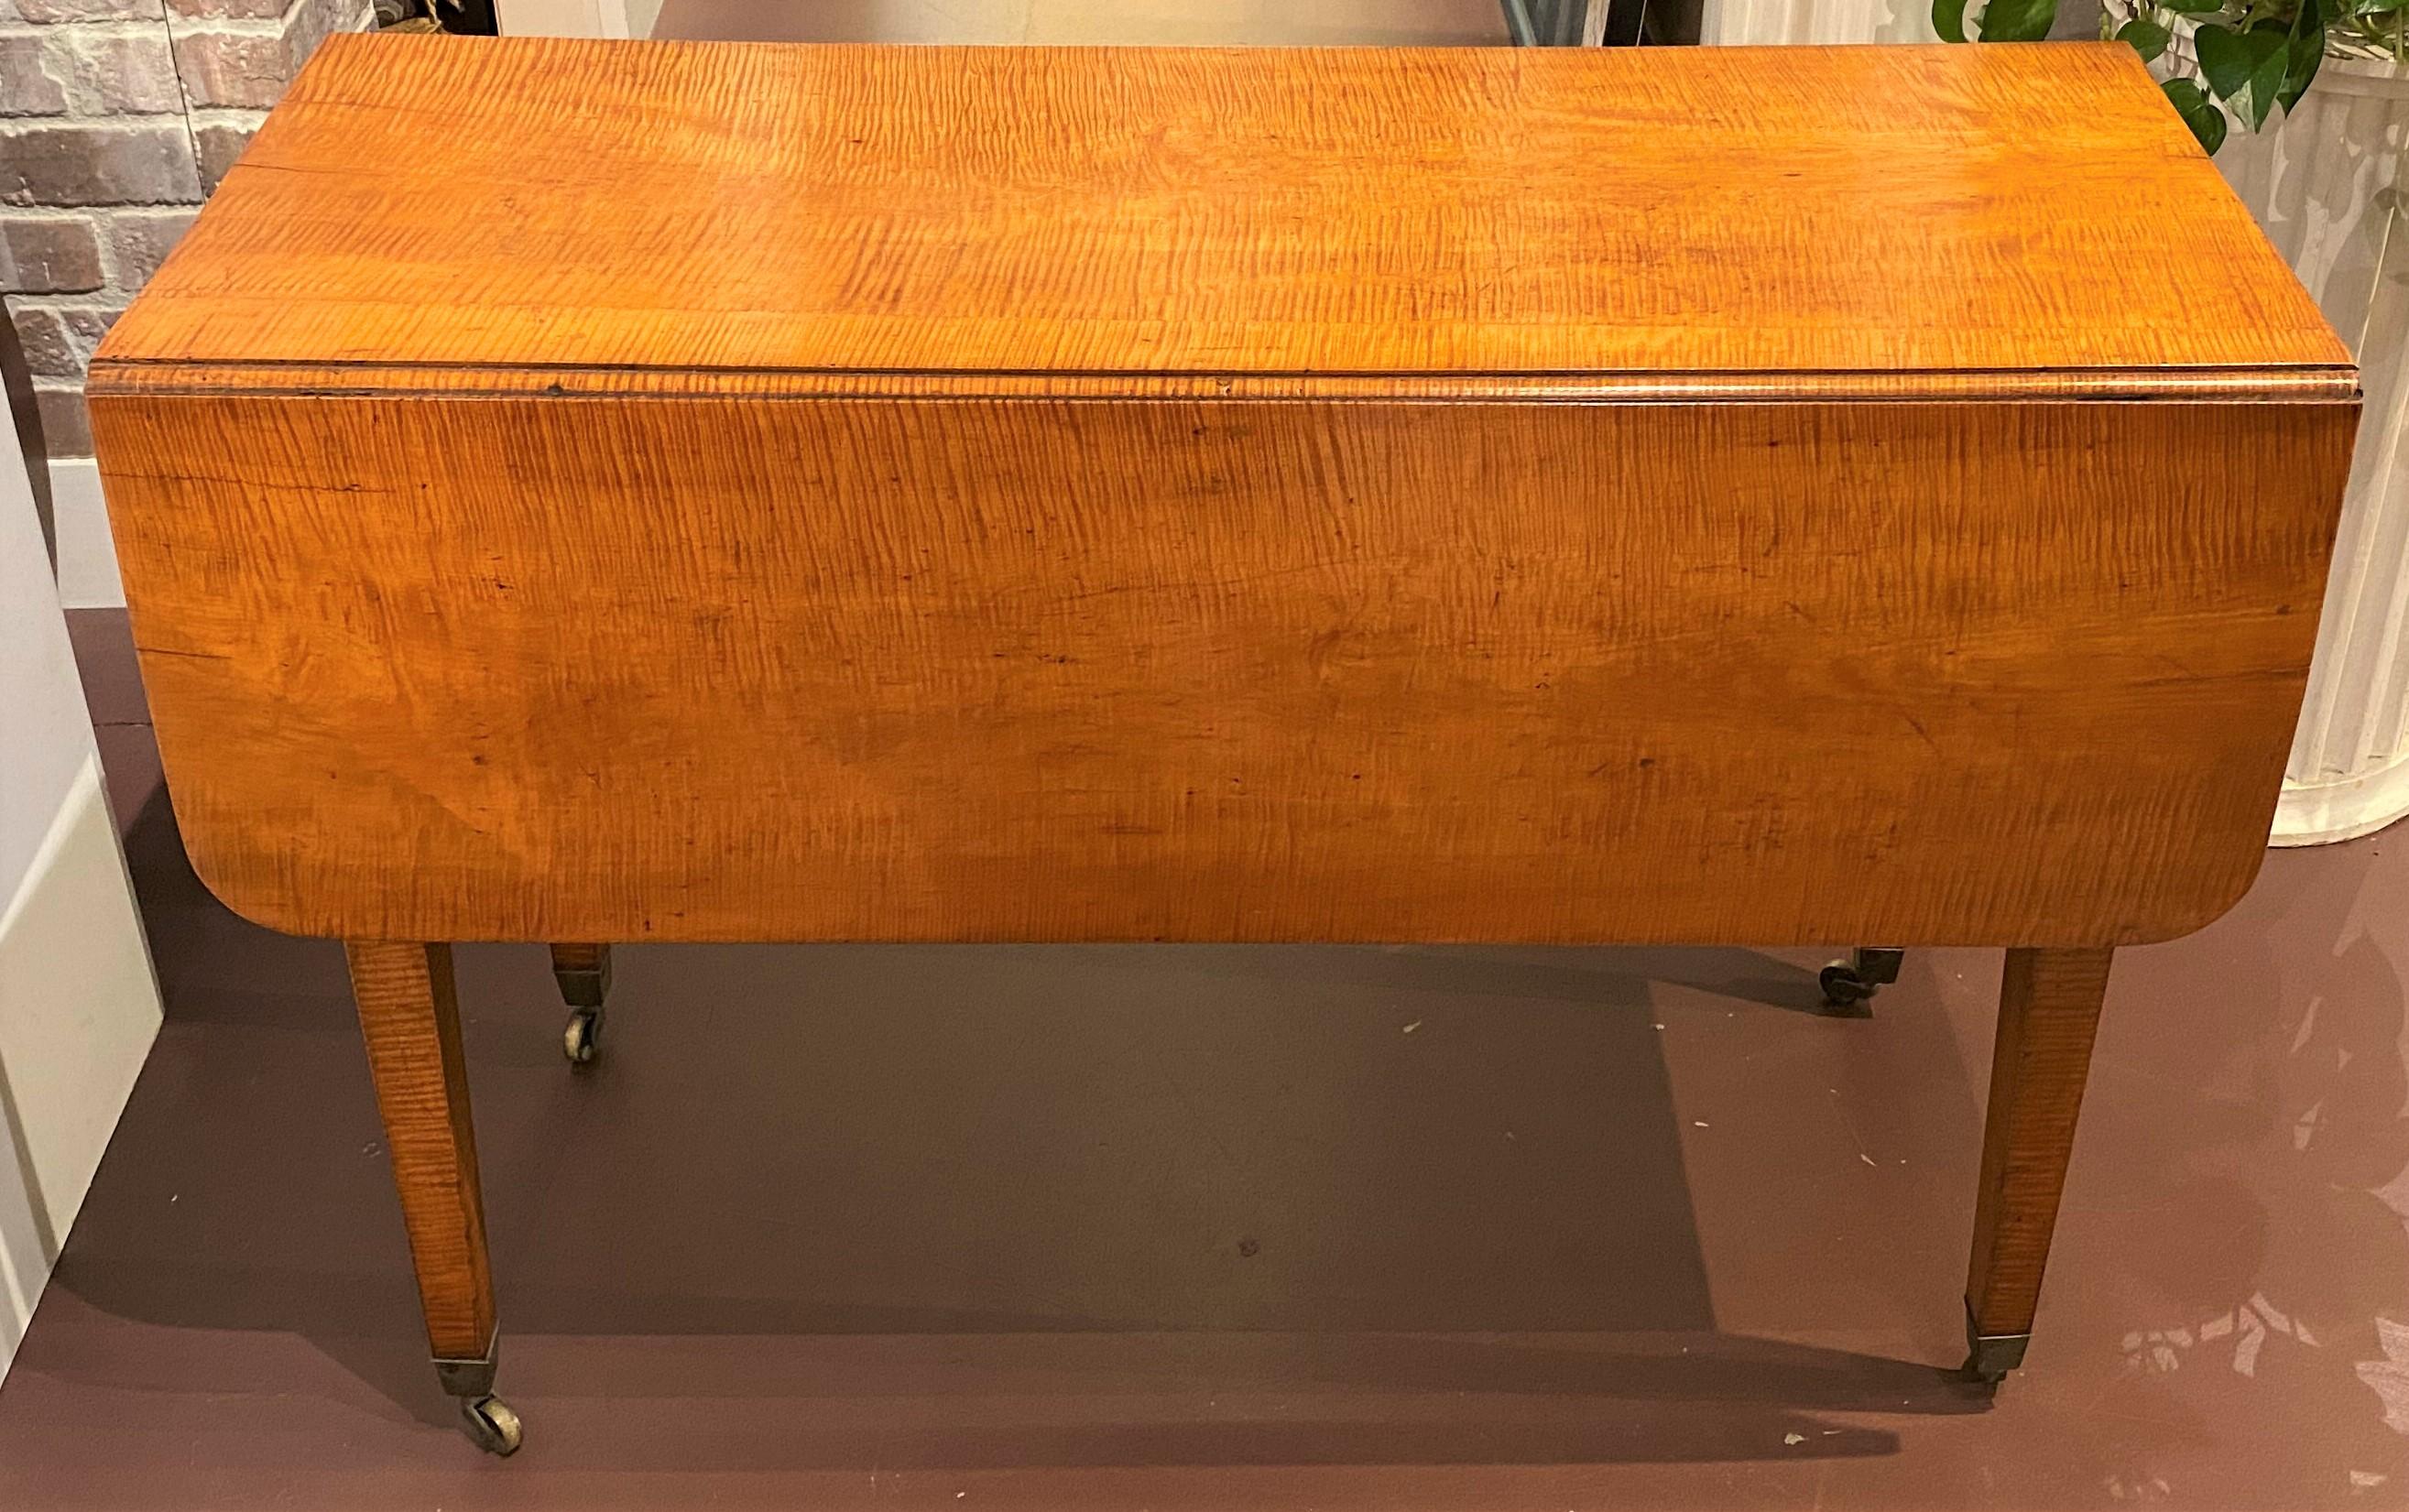 A fine example of an American Hepplewhite tiger maple rectangular drop leaf table with rounded corners and four square tapered legs, two of which being gate legs, all terminating with brass cap casters. With leaves open, the table shows off its